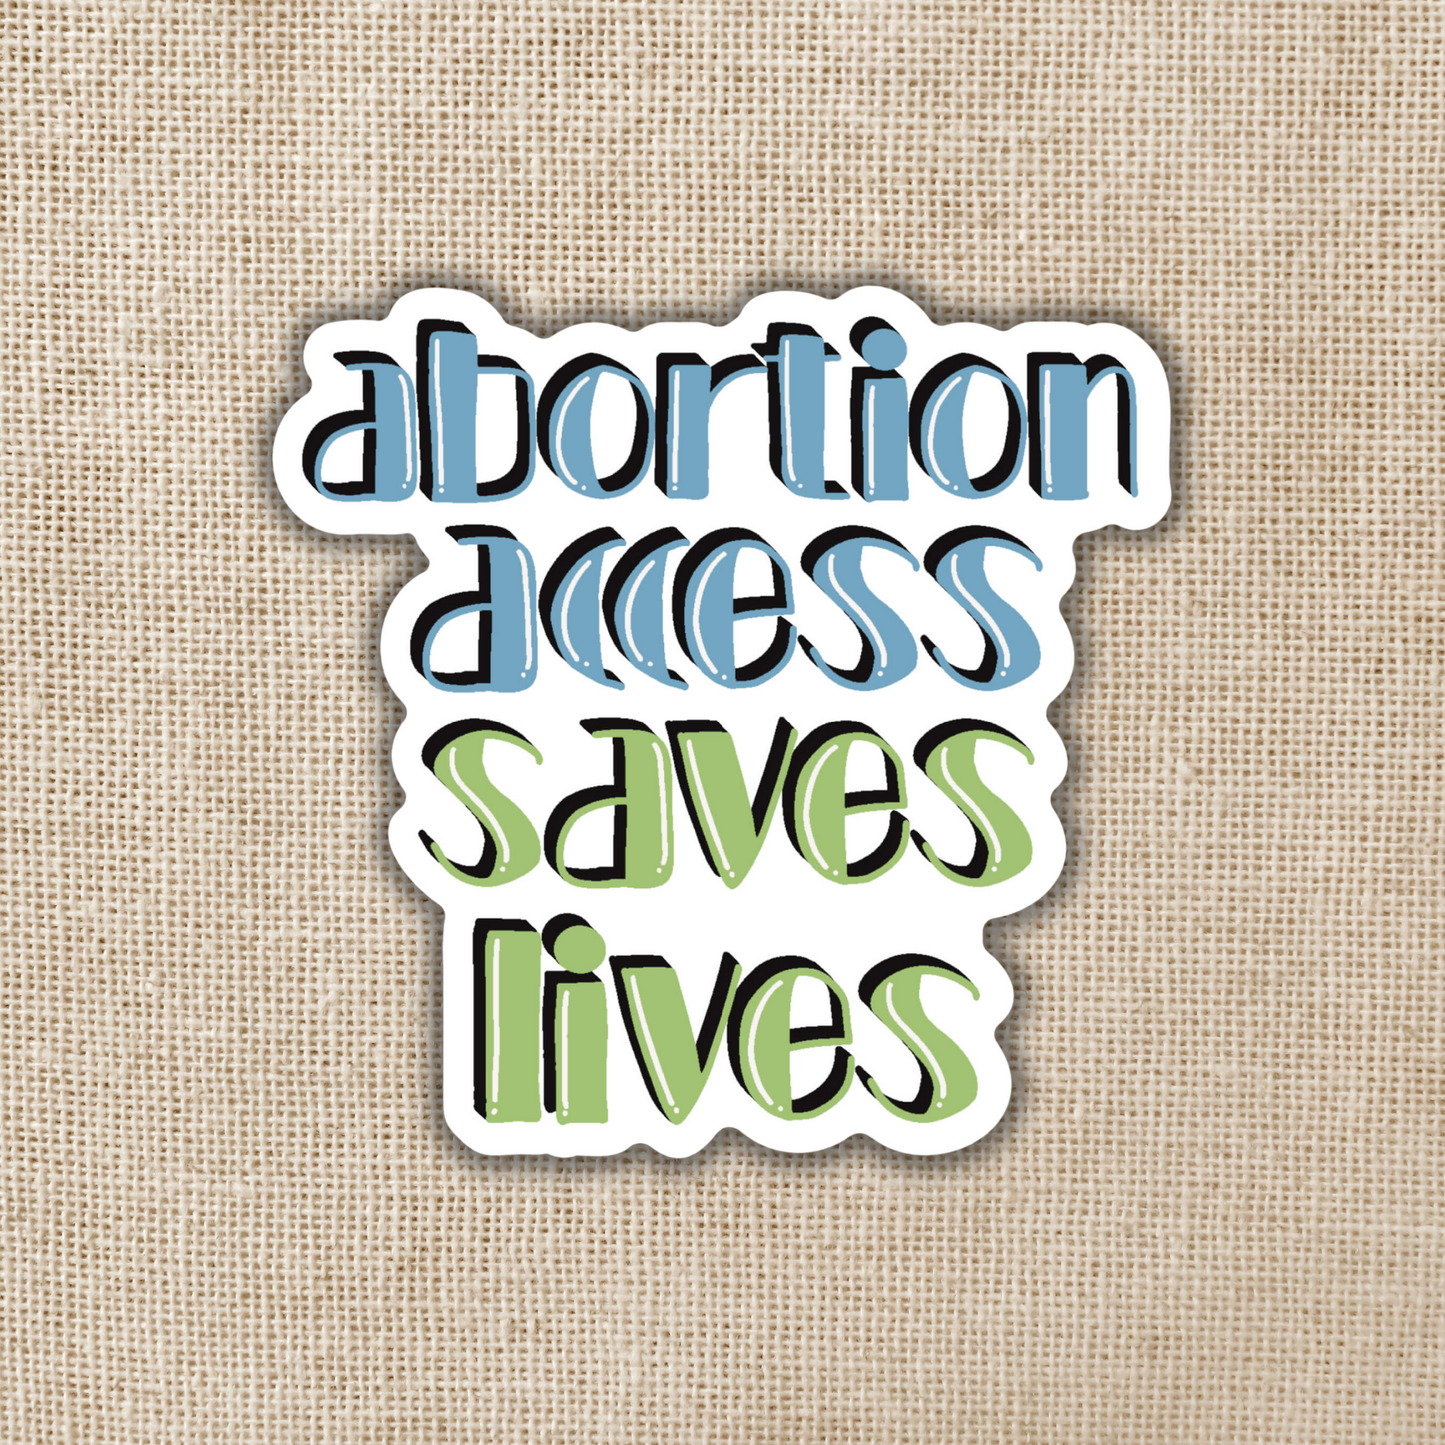 Sticker-ProChoice-03: Abortion Access Saves Lives